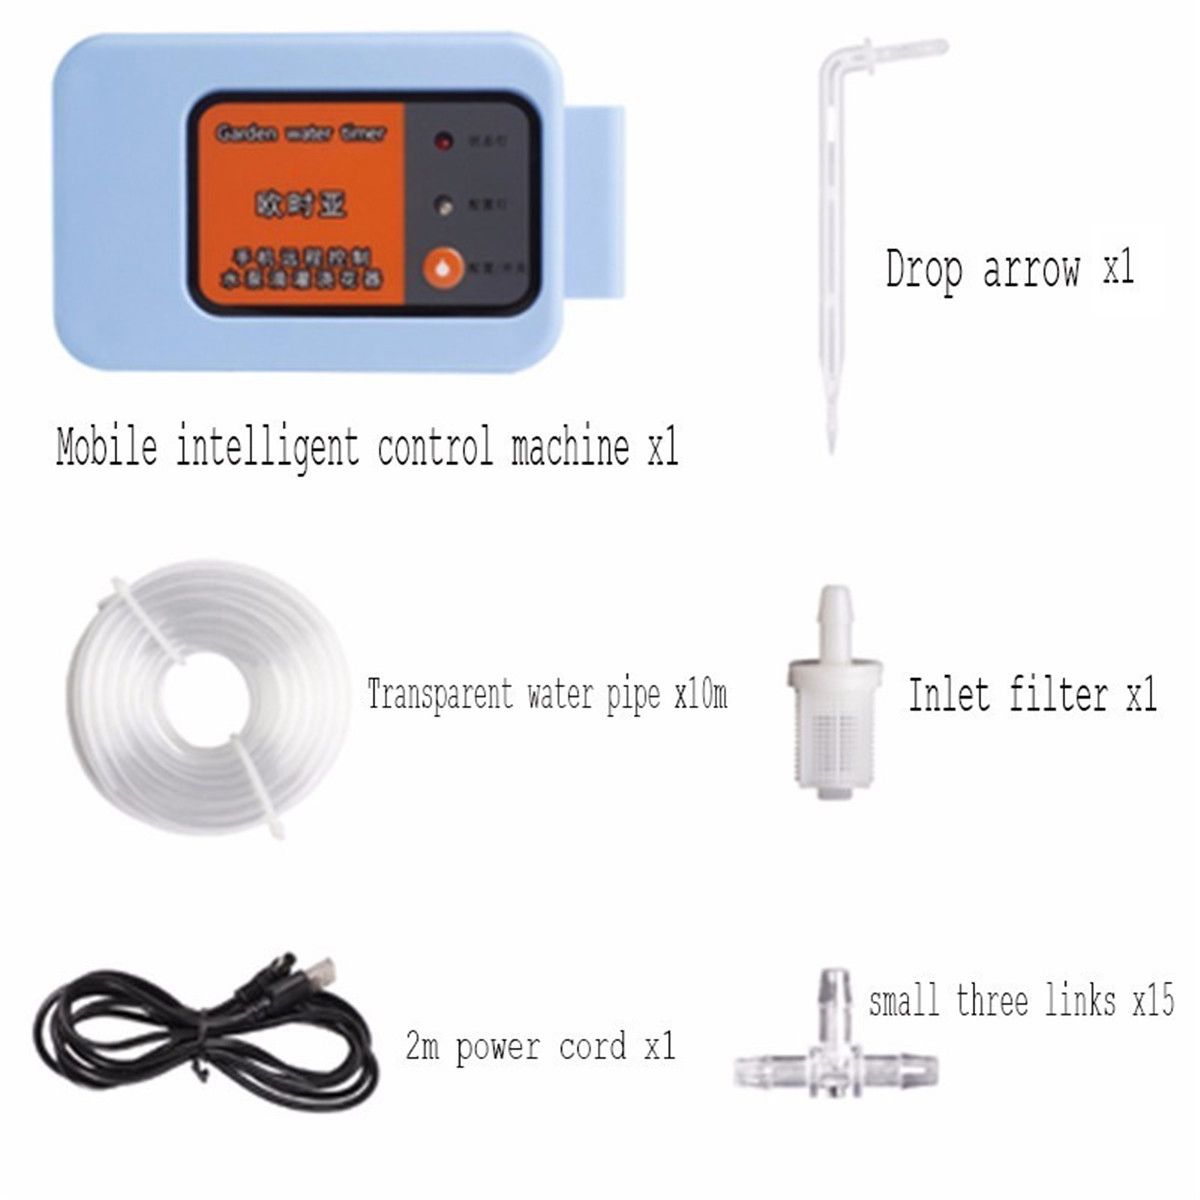 Automatic-Watering-Device-Phone-Control-Irrigation-System-Irrigation-Computer-Irrigation-Timer-with--1580072